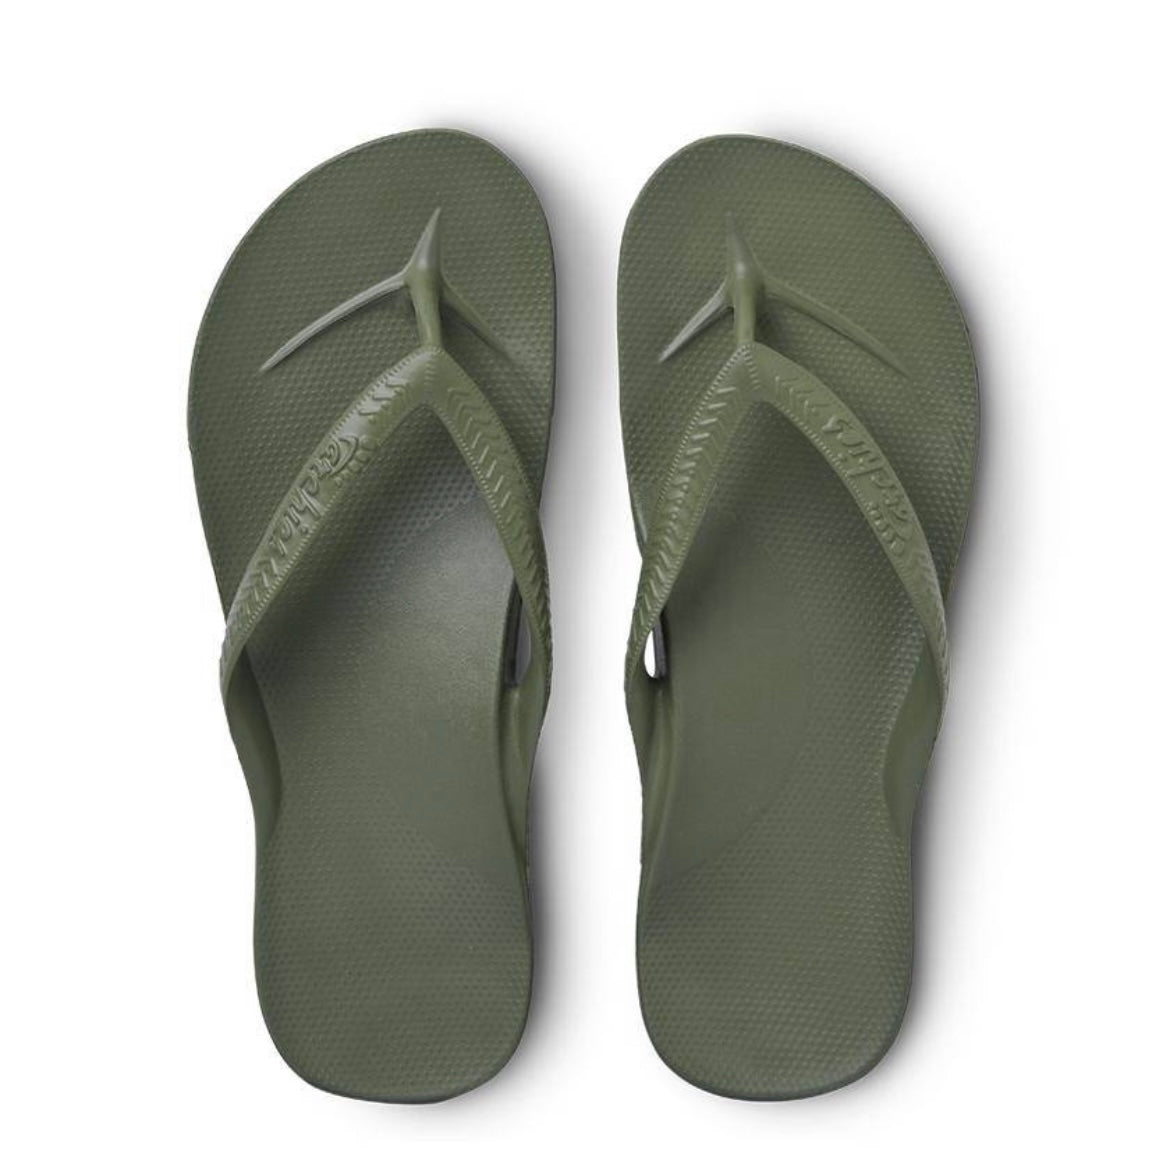 Archies Khaki Arch Support Thongs Flip Flop Orthotic